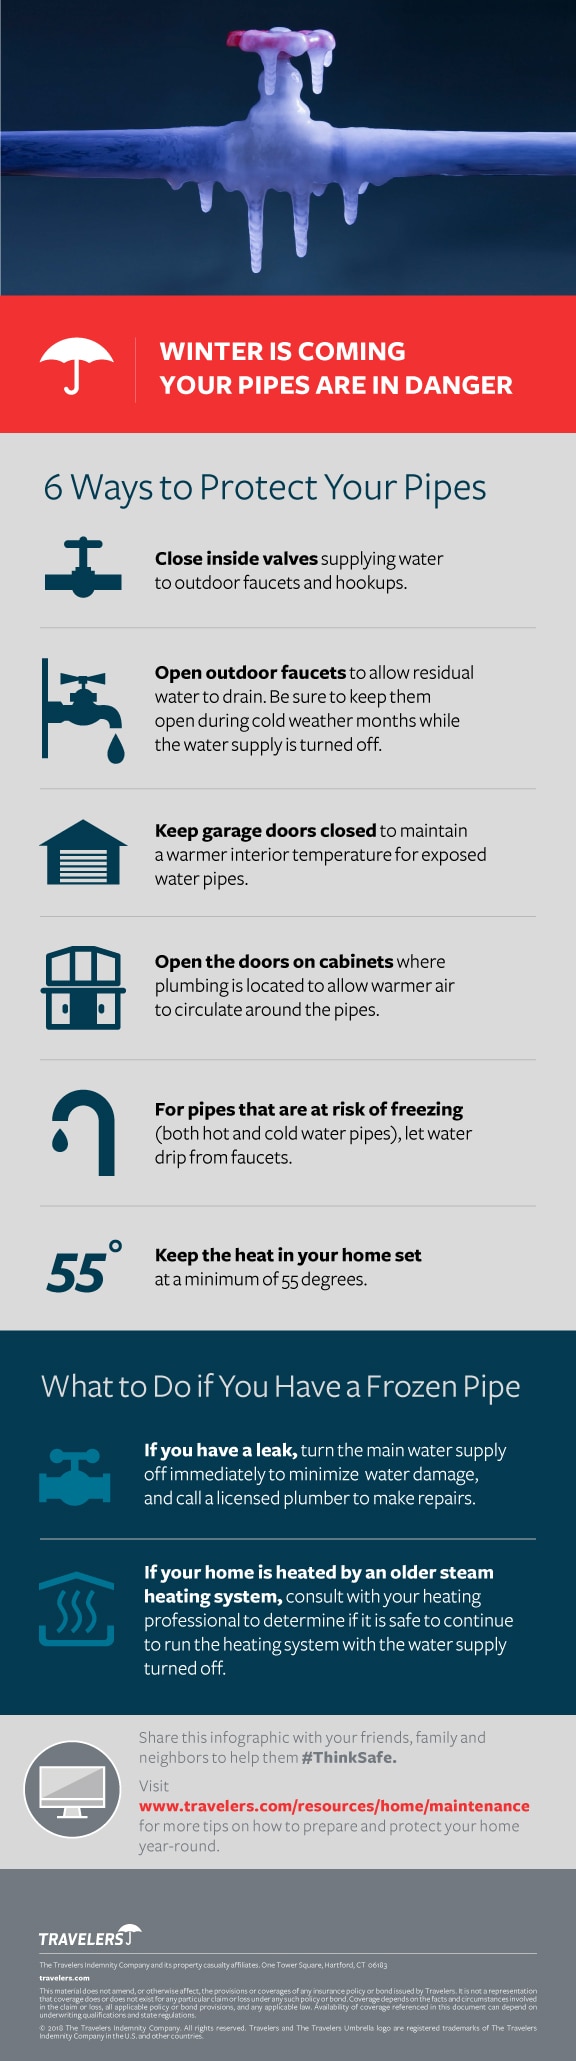 keep-your-pipes-from-freezing-this-winter-infographic-travelers